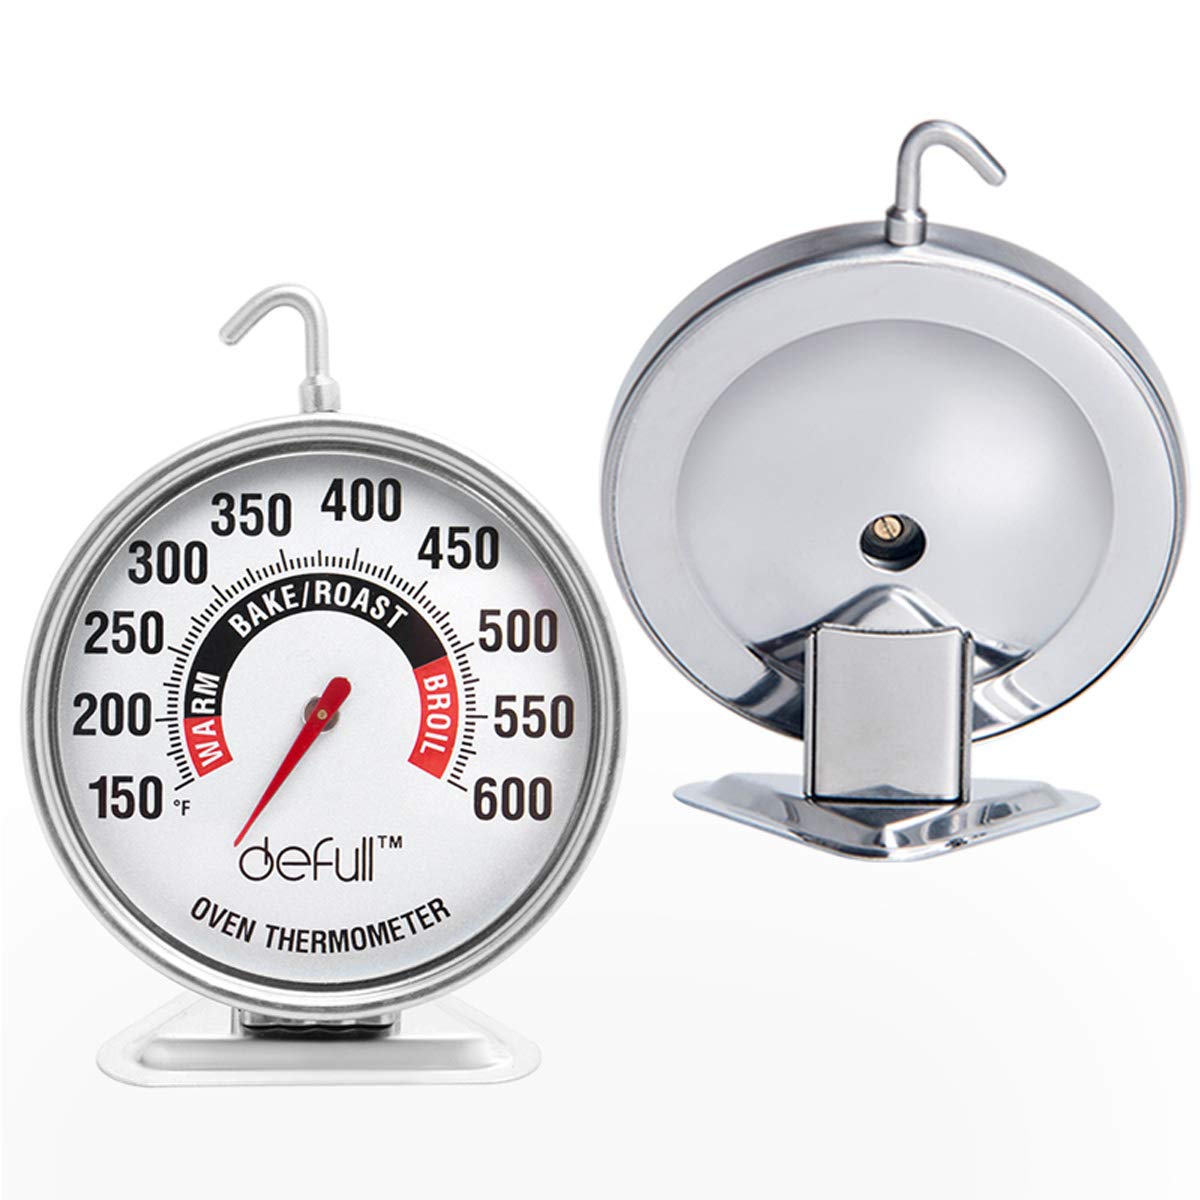 Oven thermometer for polymer clay, Amazon